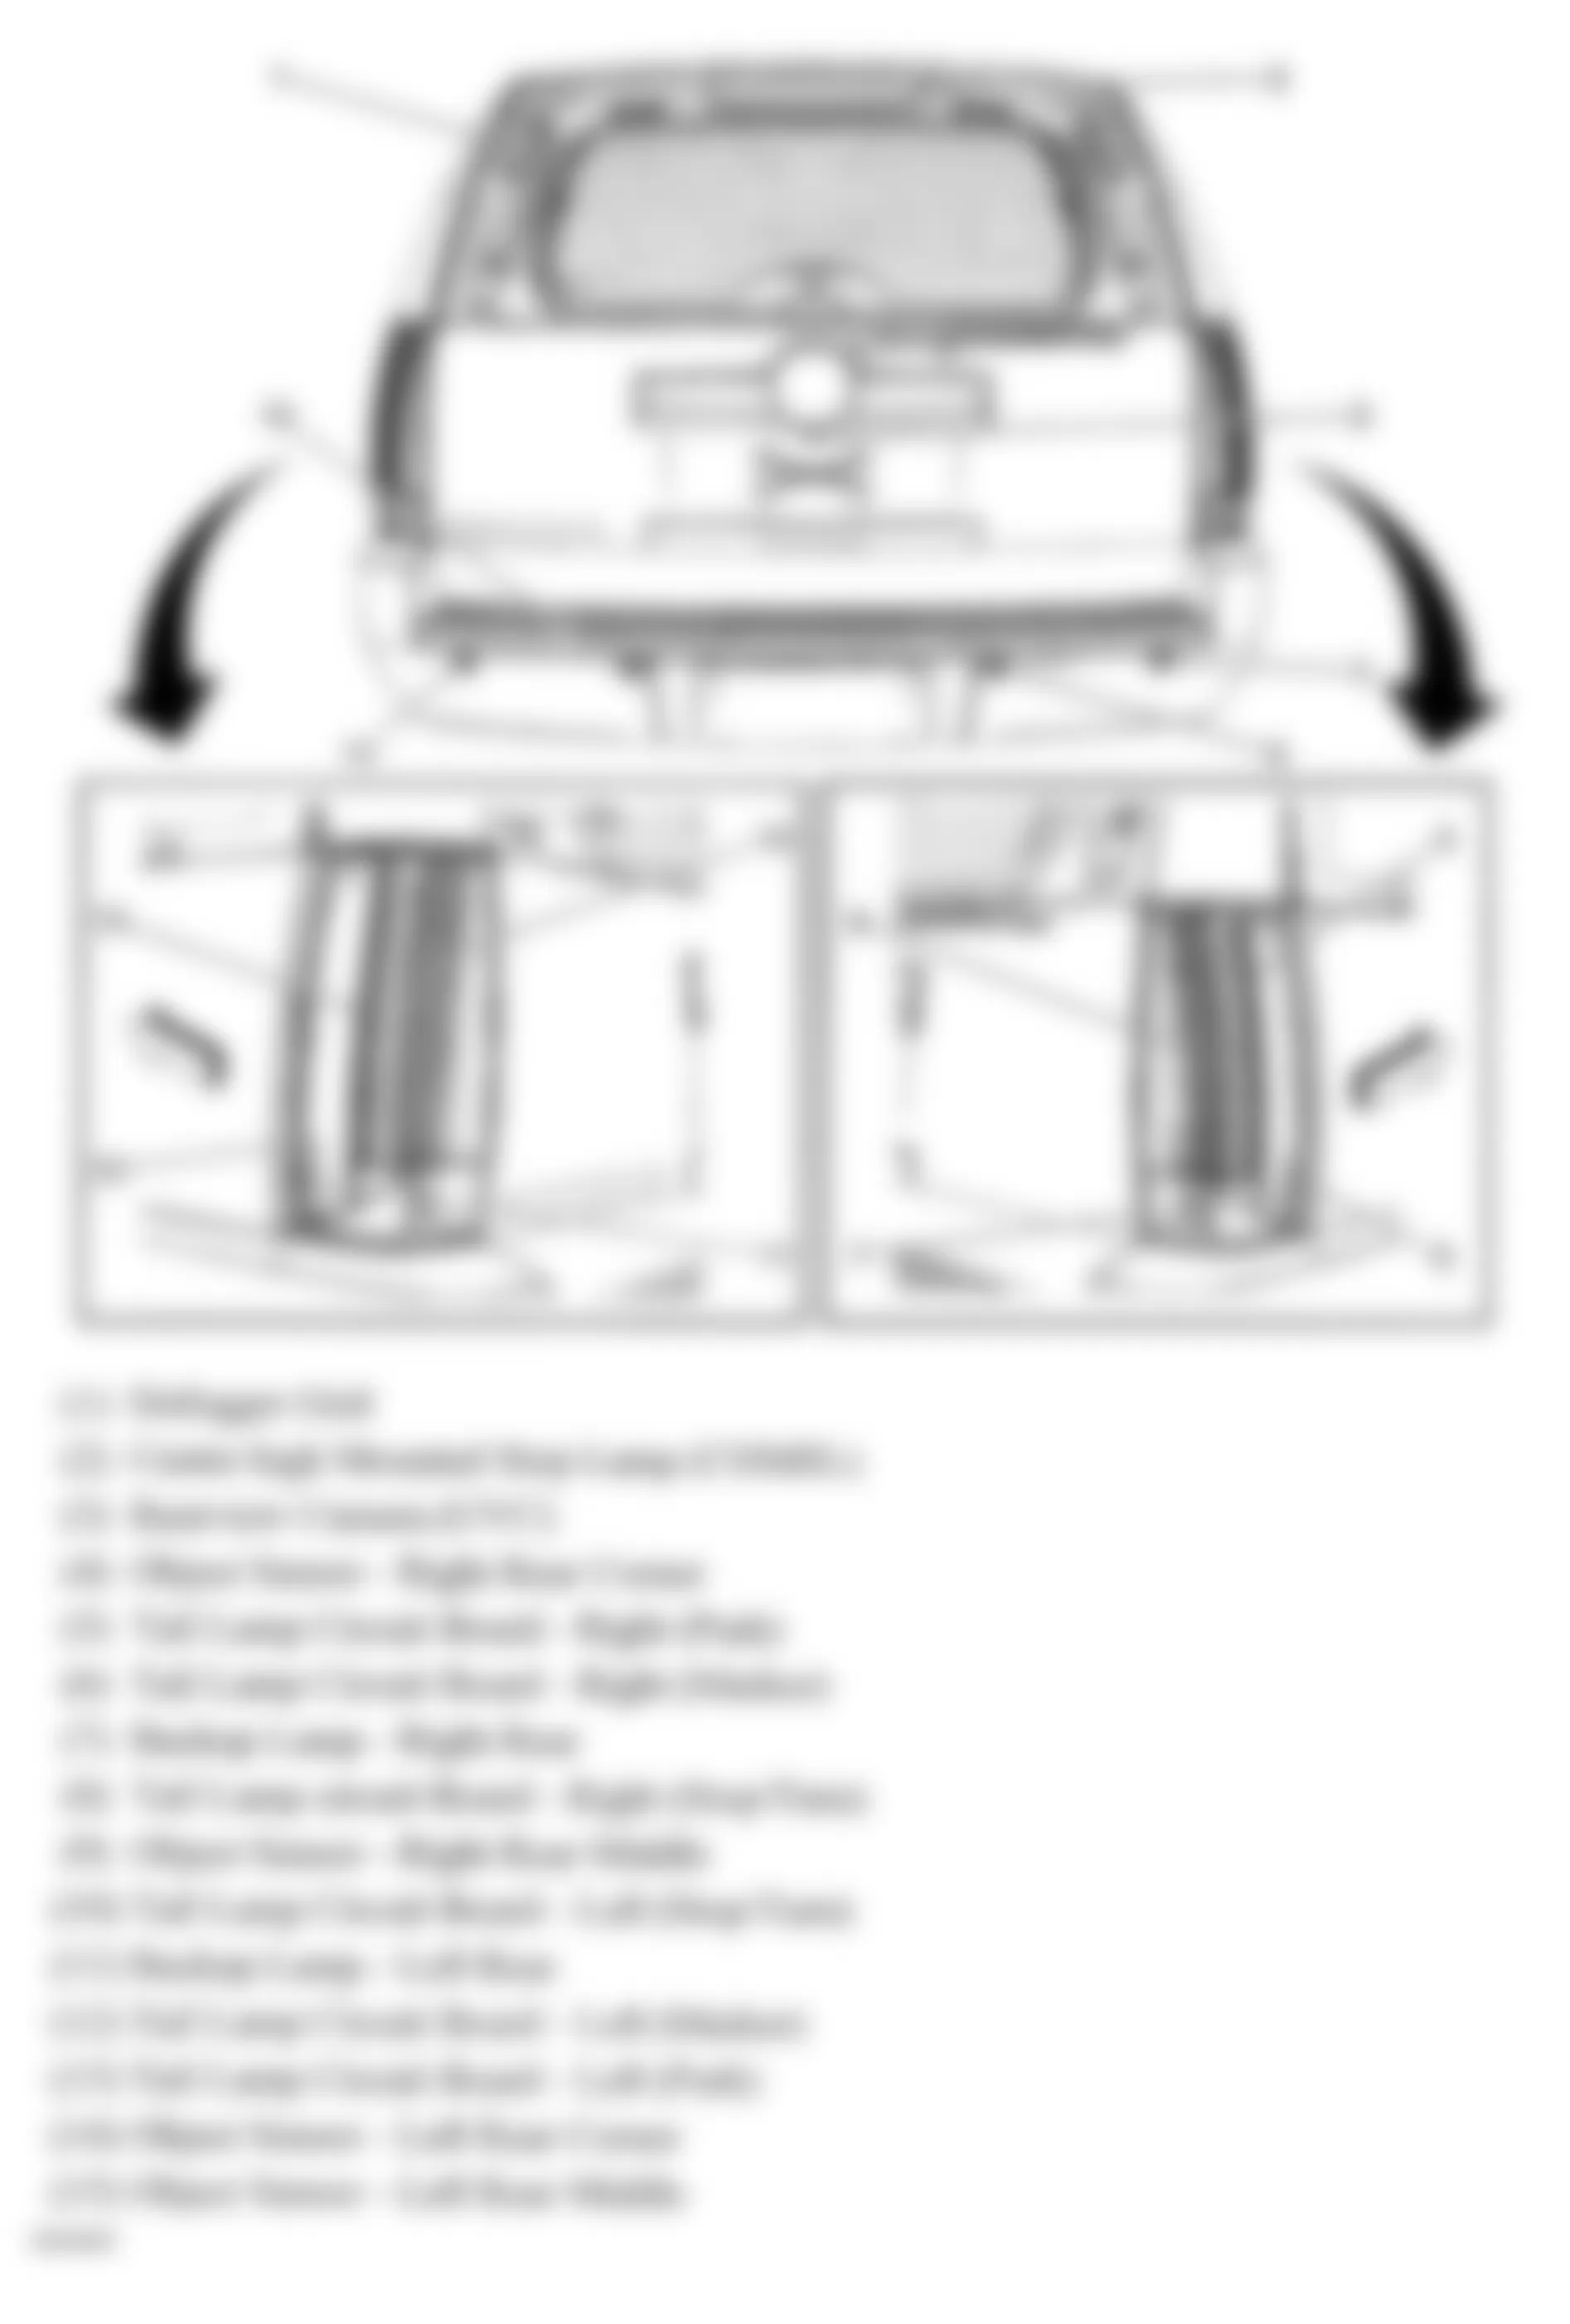 Chevrolet Avalanche 2010 - Component Locations -  Rear Of Vehicle (Tahoe & Escalade W/One Piece Liftgate)